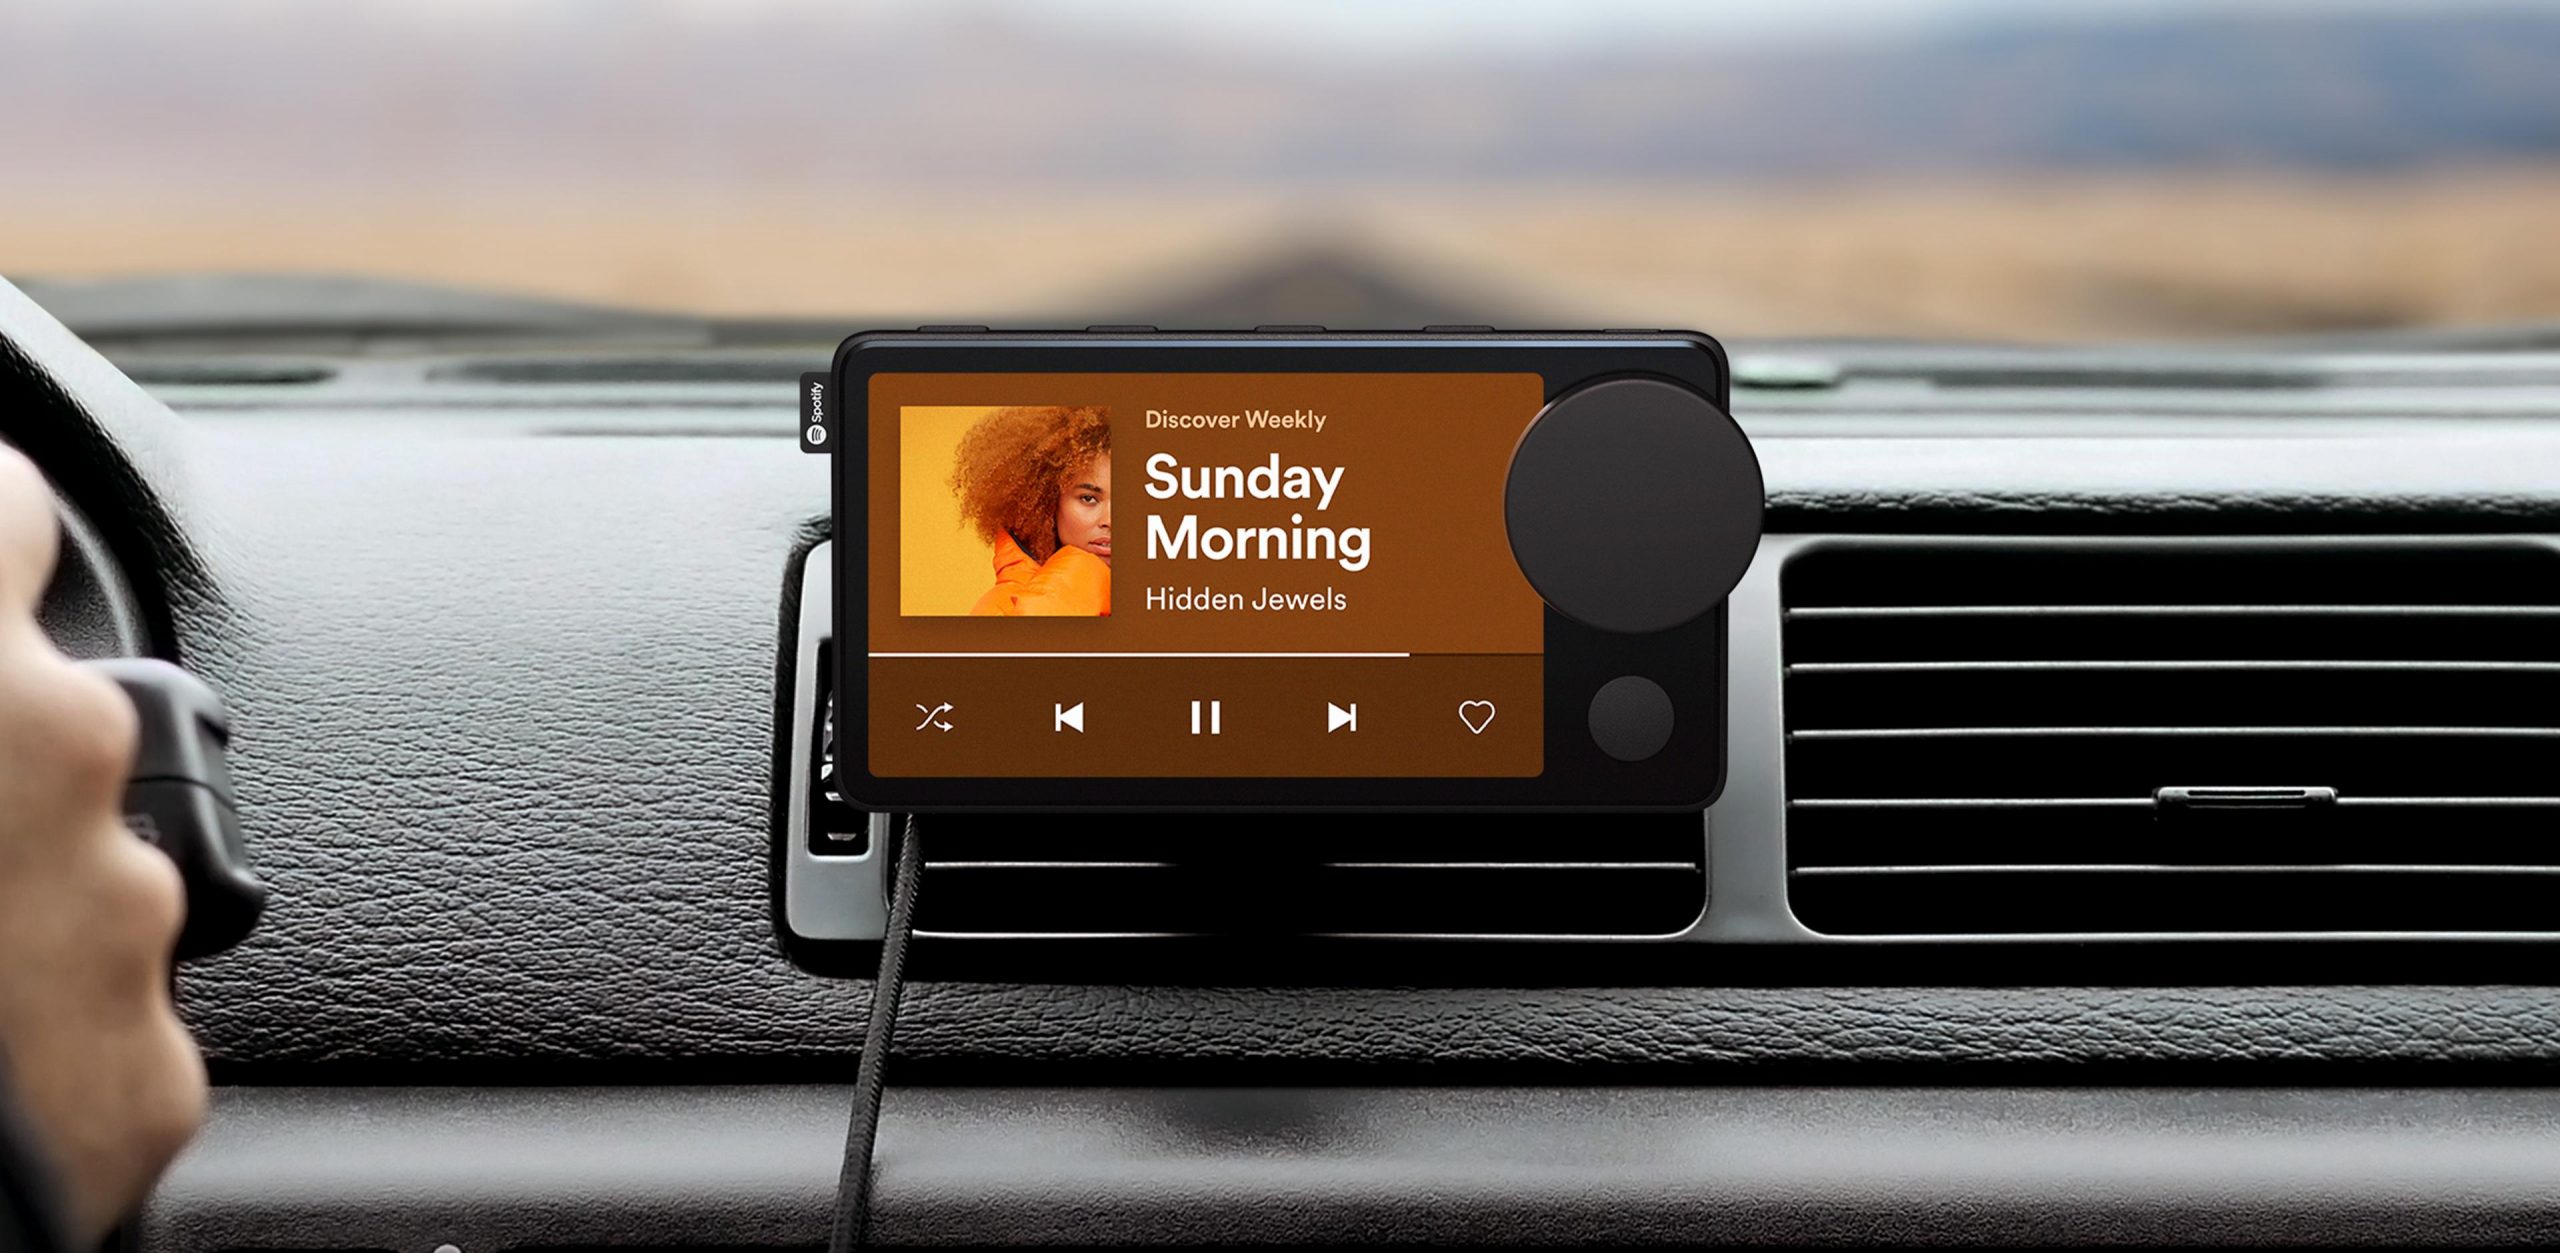 Spotify Stops Making Dash-Mounted ‘Car Thing’ Just Five Months After Launch